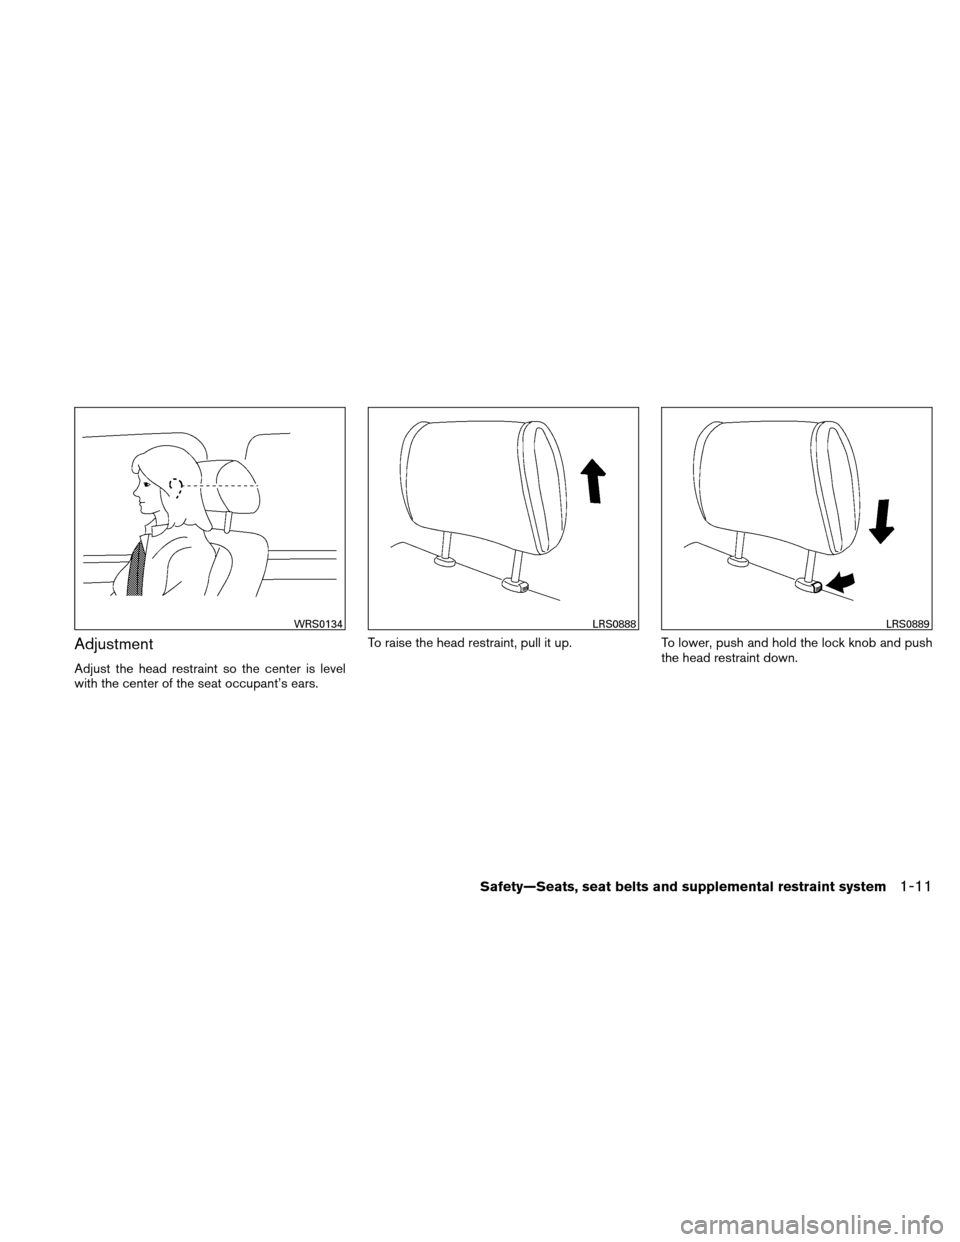 NISSAN ALTIMA COUPE 2011 D32 / 4.G Owners Manual Adjustment
Adjust the head restraint so the center is level
with the center of the seat occupant’s ears.To raise the head restraint, pull it up.
To lower, push and hold the lock knob and push
the he